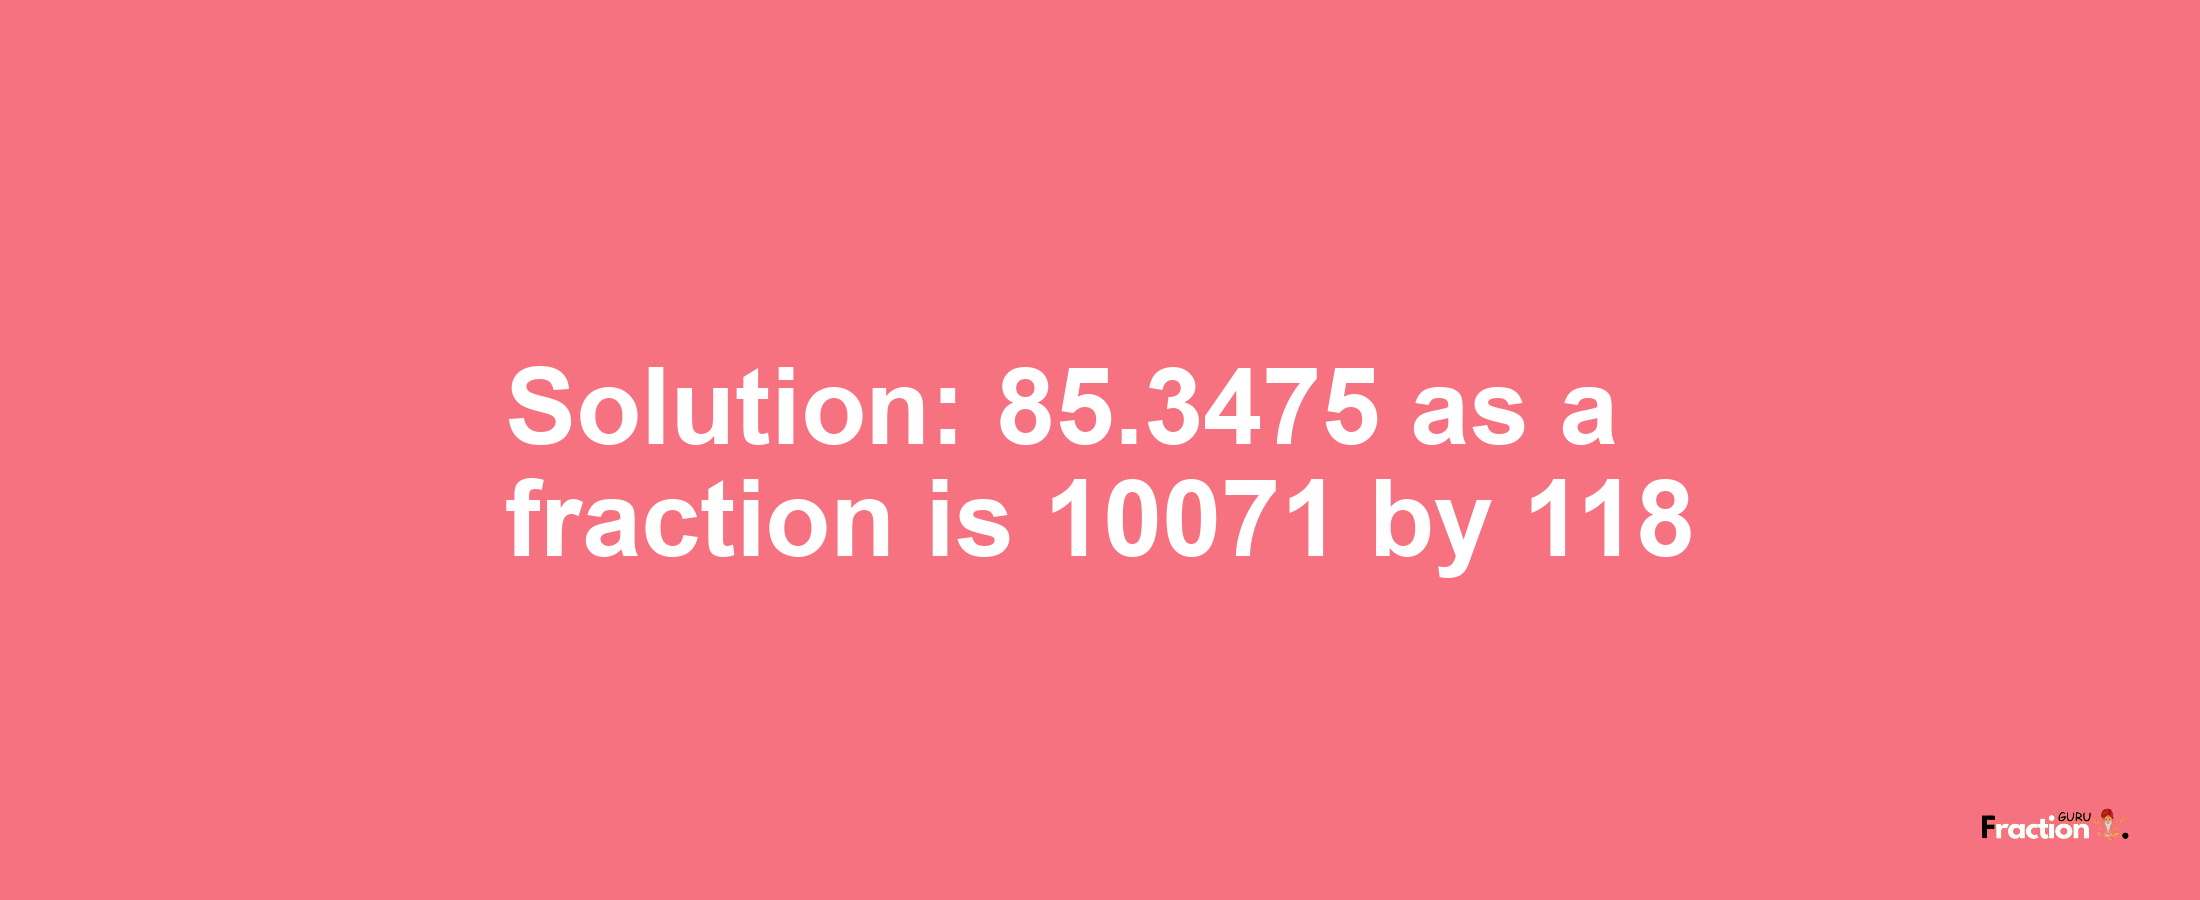 Solution:85.3475 as a fraction is 10071/118